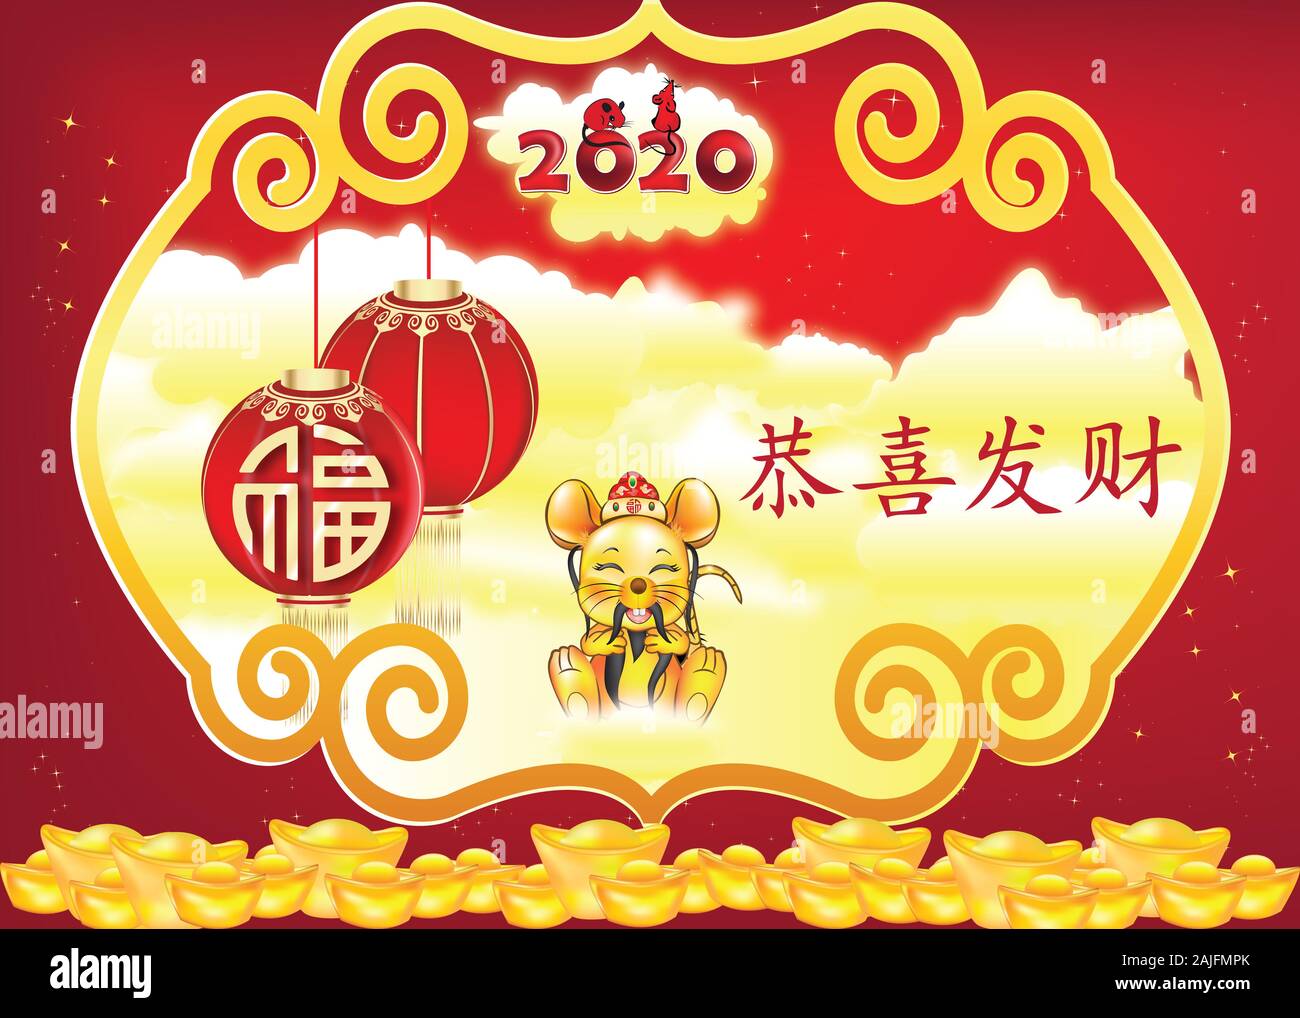 Happy Chinese New Year of Rat 2020 - greeting card. Ideograms translation: Year of the Rat. The isolated ideogram is the Taoist symbol of good luck Stock Photo